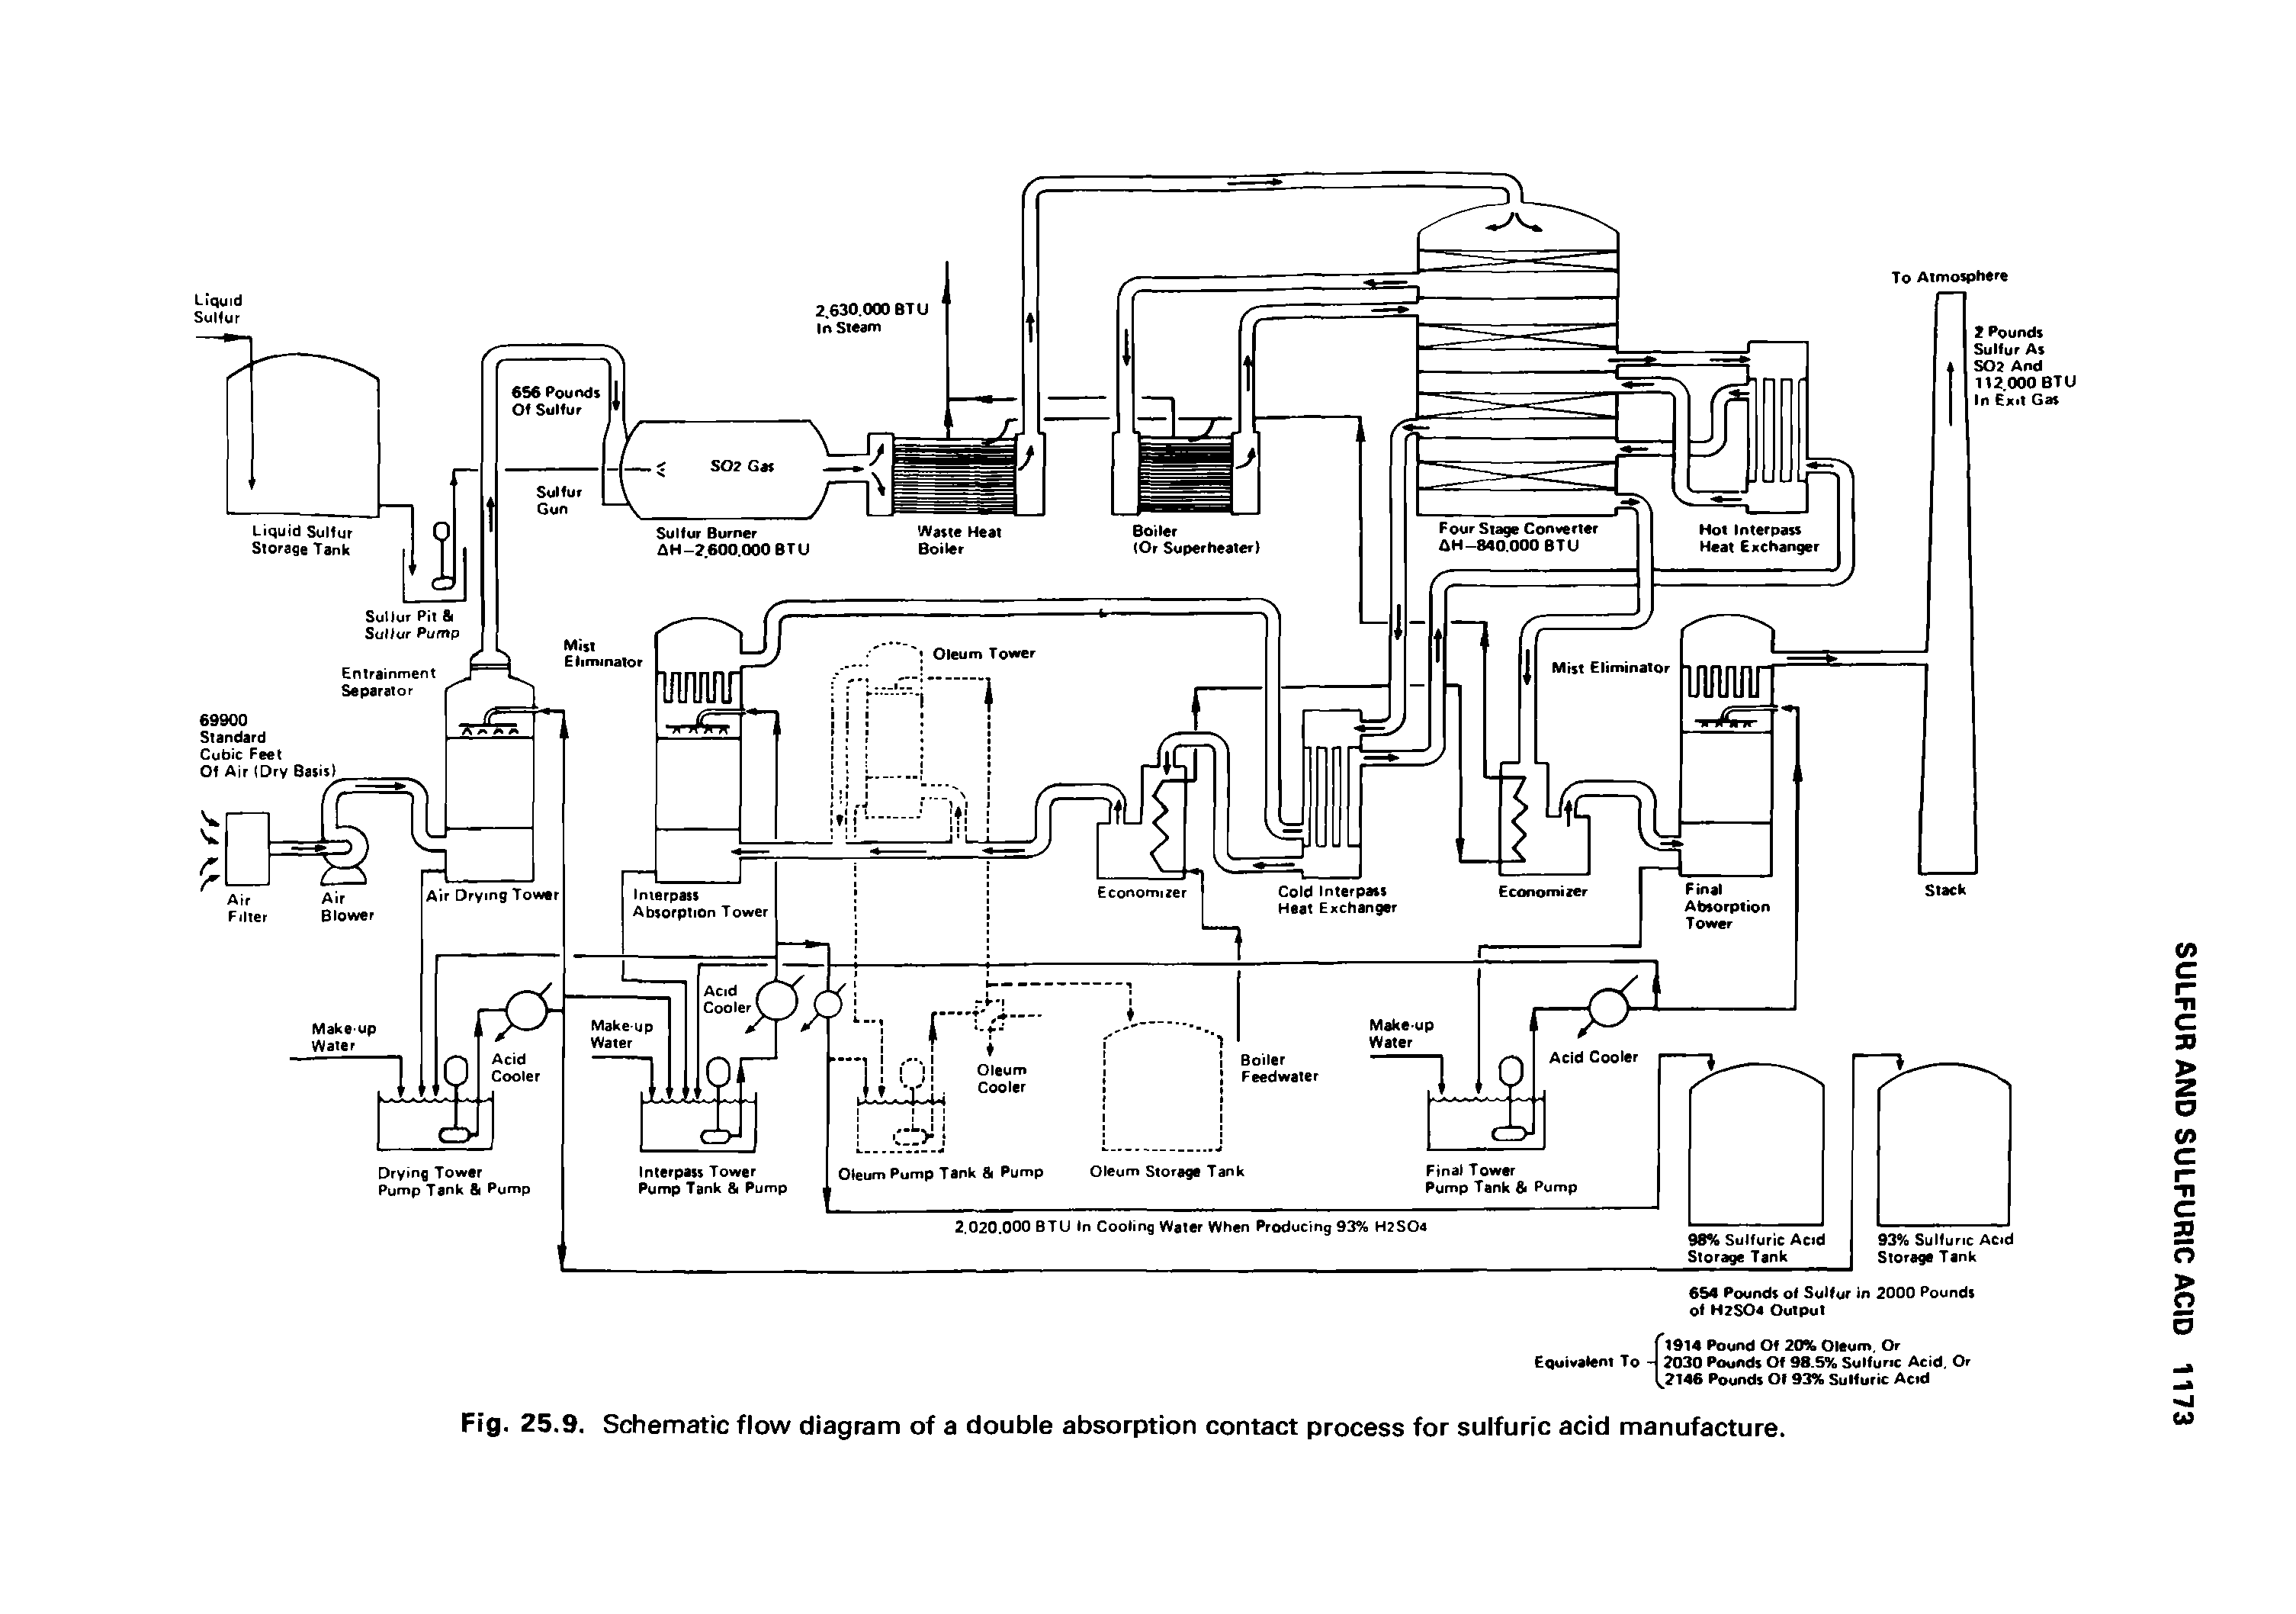 Fig. 25.9. Schematic flow diagram of a double absorption contact process for sulfuric acid manufacture.